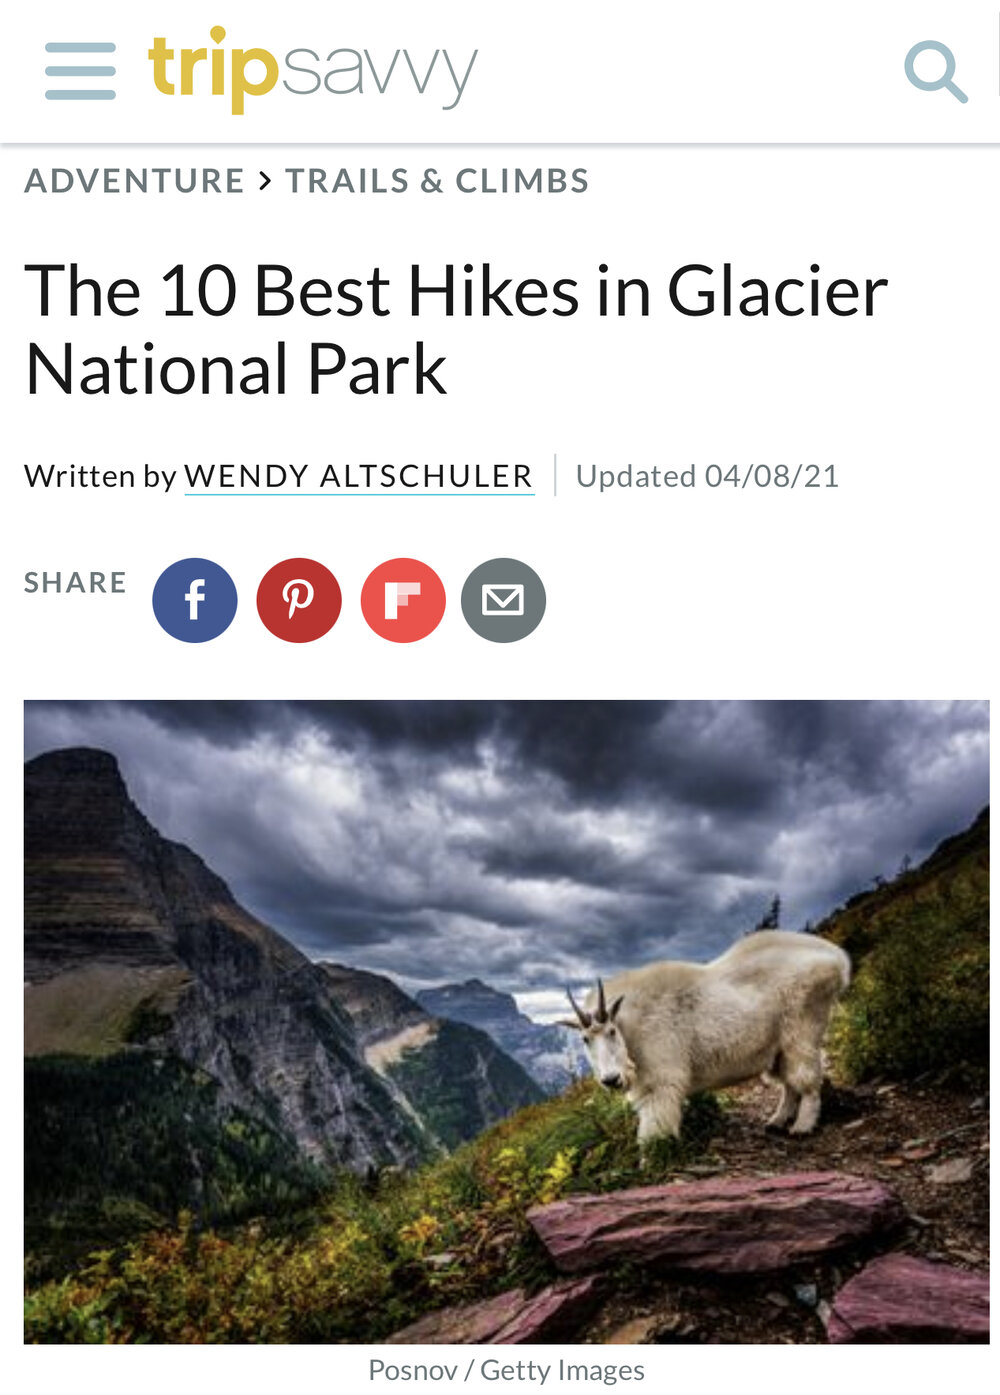 The 10 Best Hikes in Glacier National Park